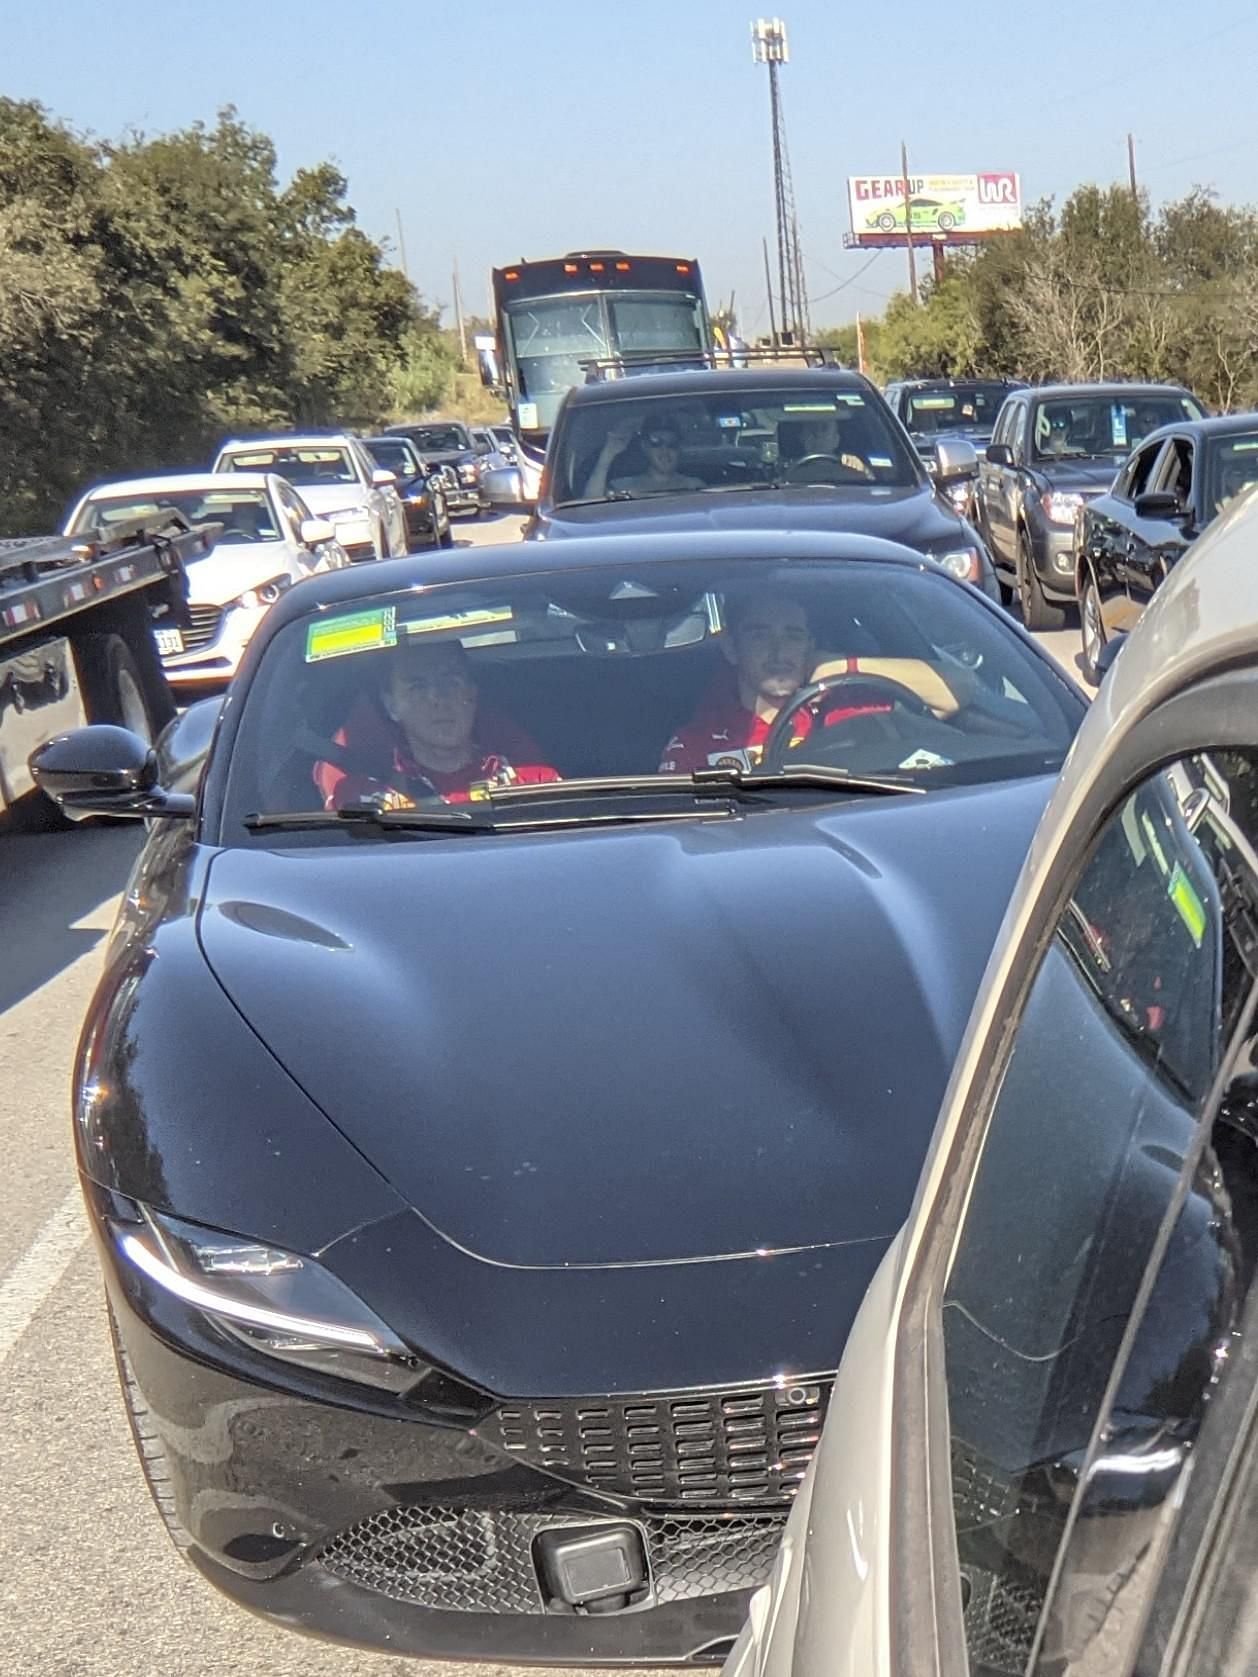 Charles Leclerc stuck in traffic before FP1 of USGP. Taken from r/FormulaOne on Reddit. Posted by u/nyuncat